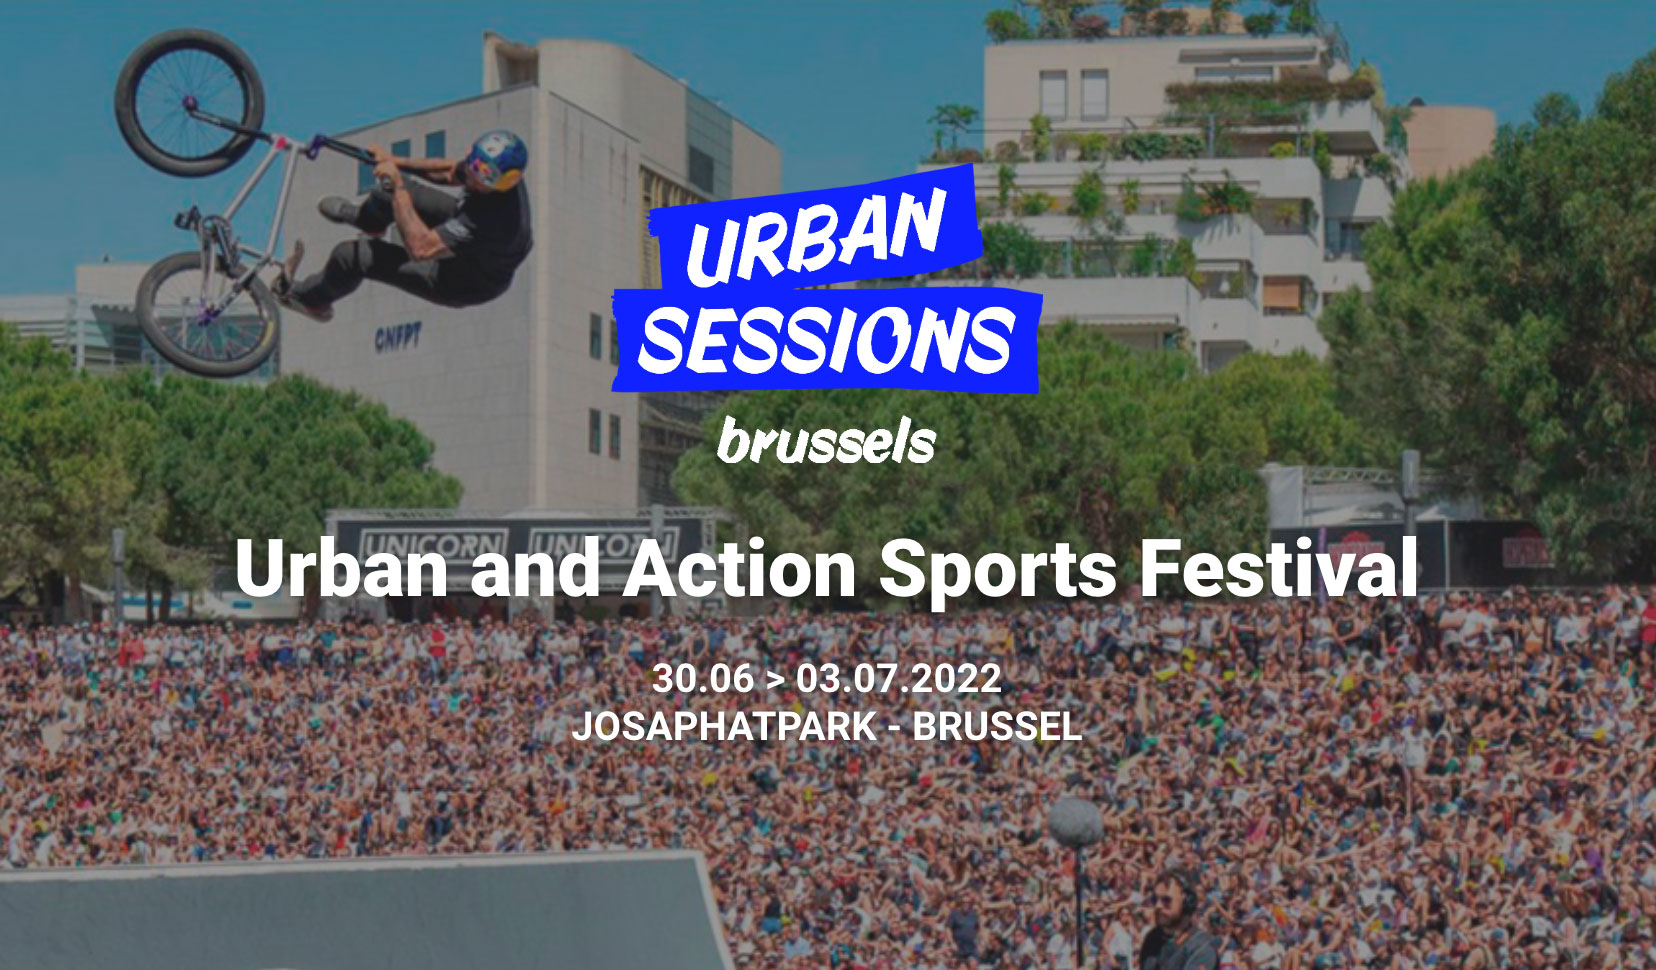 Urban Sessions, a NEW Four-day Festival